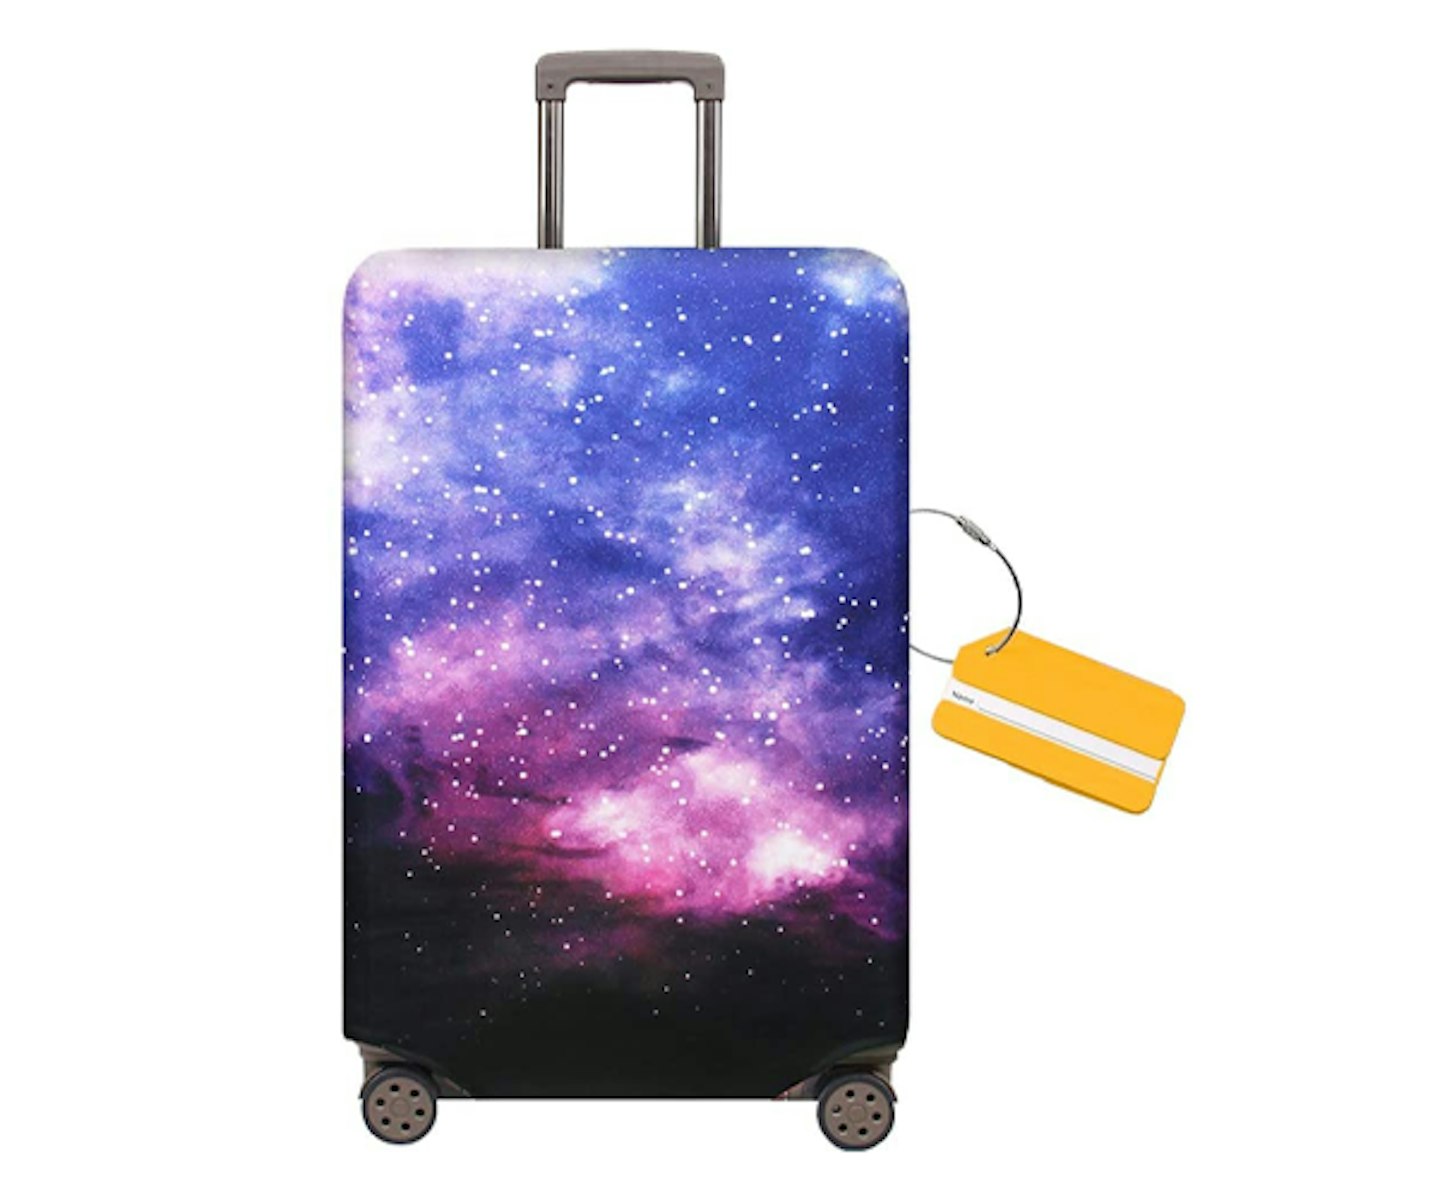 OrgaWise Travel Luggage Cover Elastic Suitcase Cover